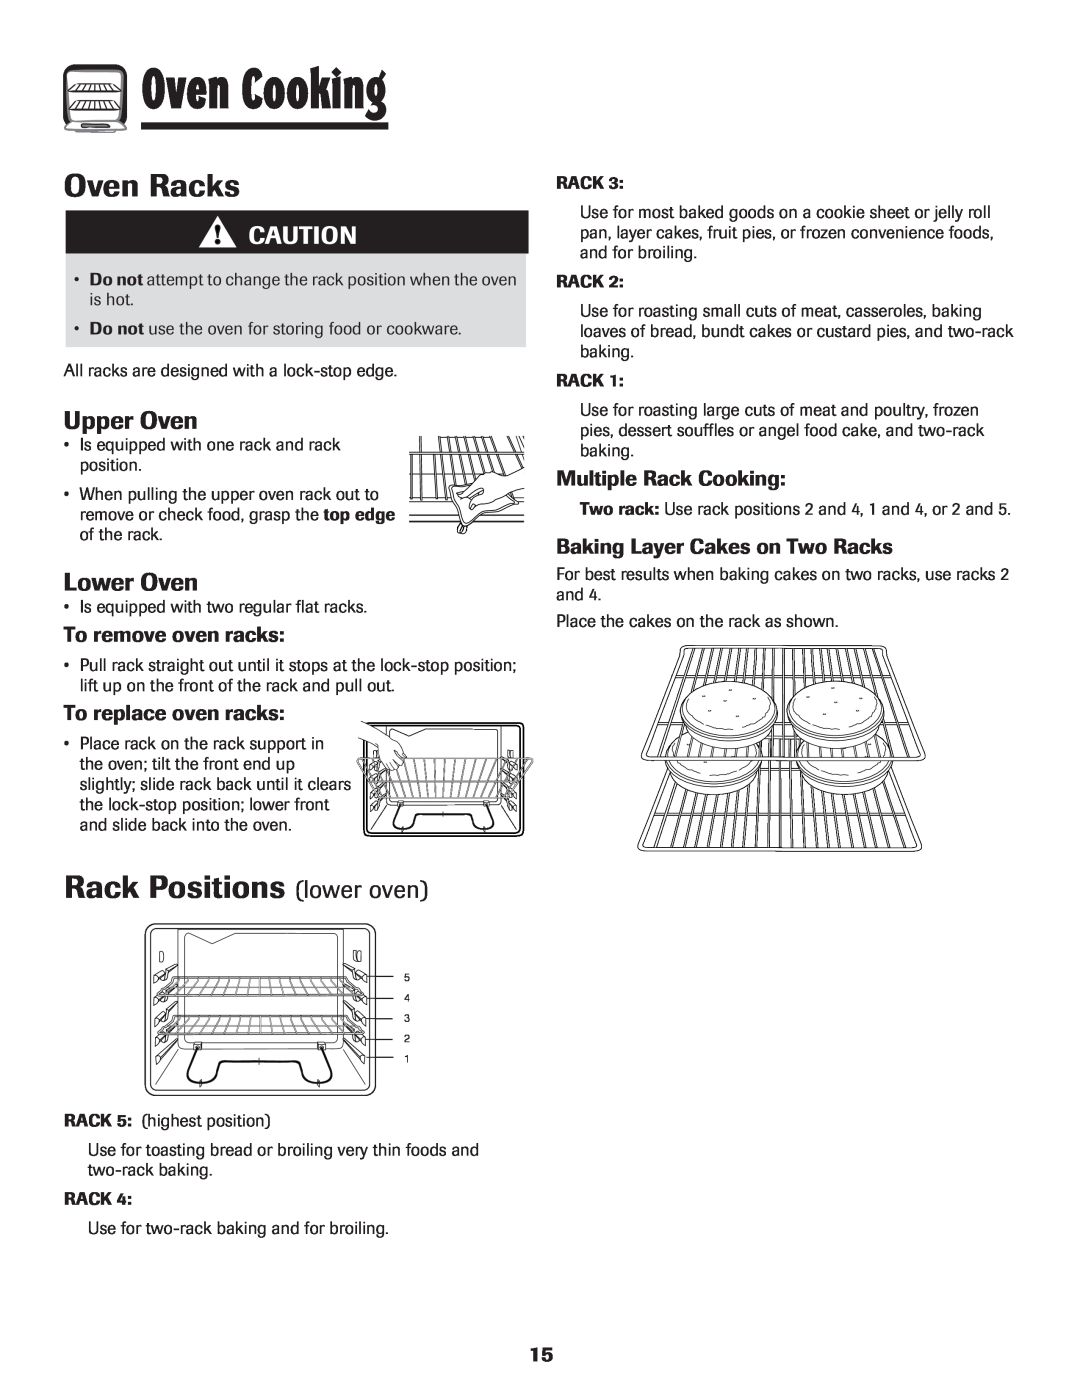 Maytag 500 Series Oven Racks, Rack Positions lower oven, Upper Oven, Lower Oven, To remove oven racks, Oven Cooking 